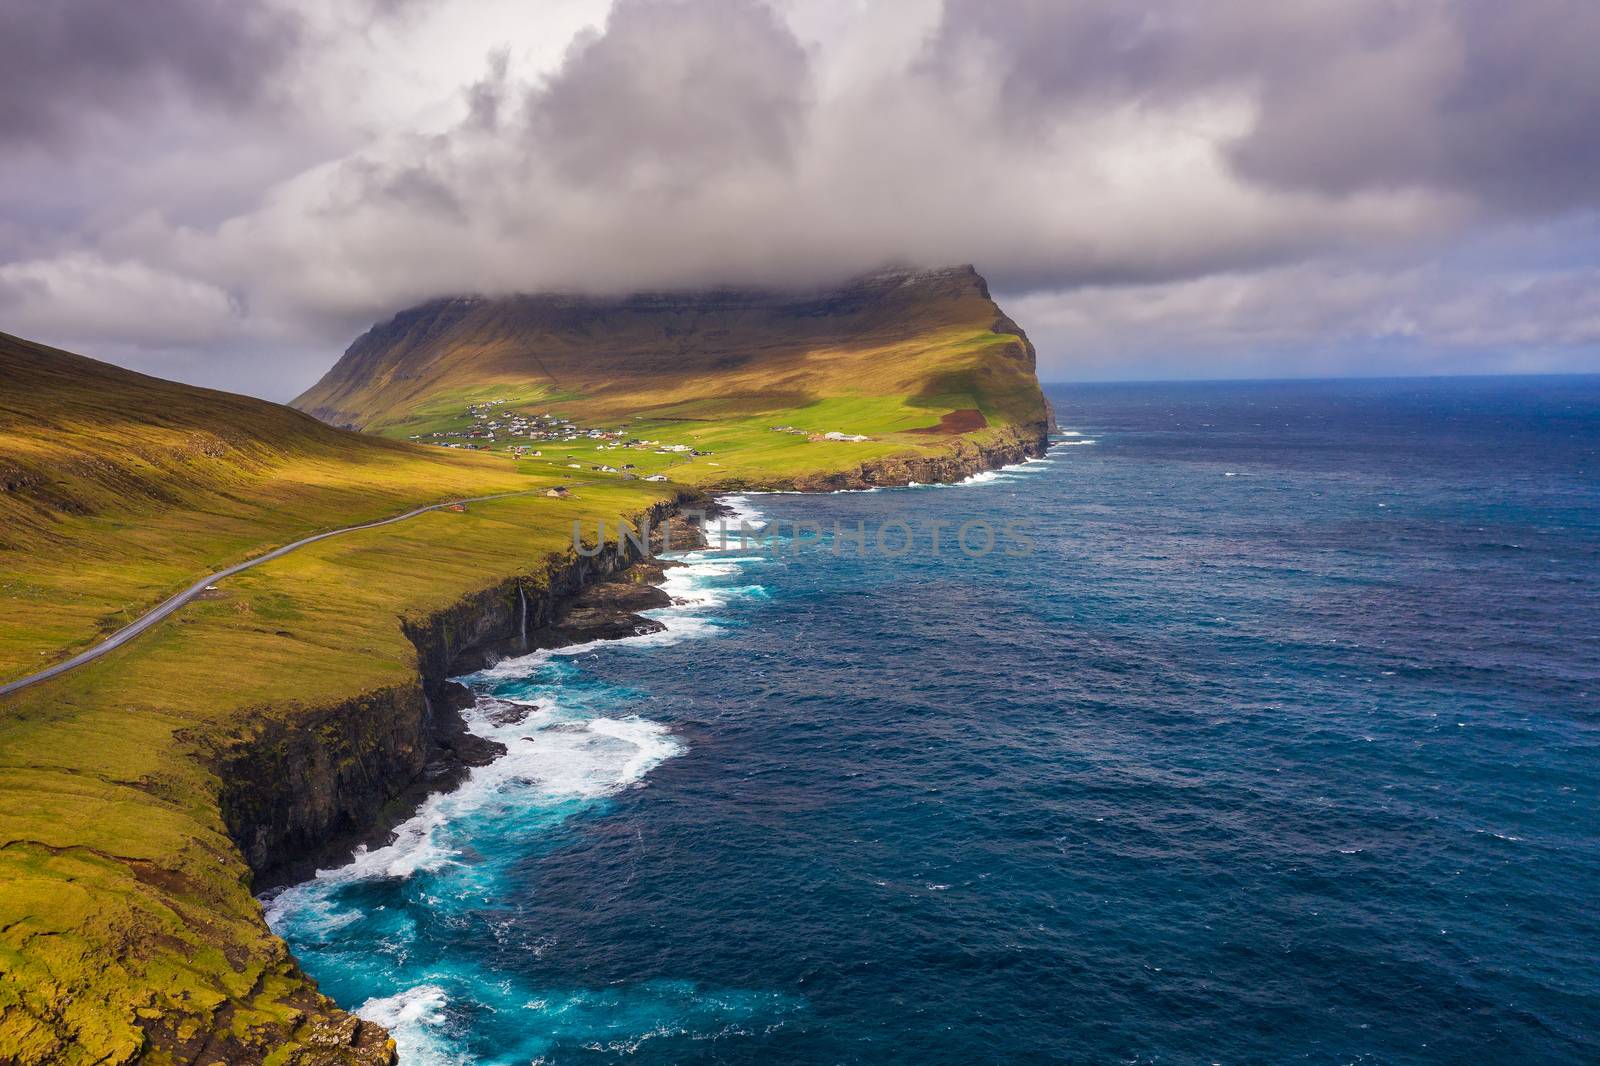 Aerial view of a road going along the atlantic coast to the village of Vidareidi on Faroe Islands surrounded by beatiful scenery.